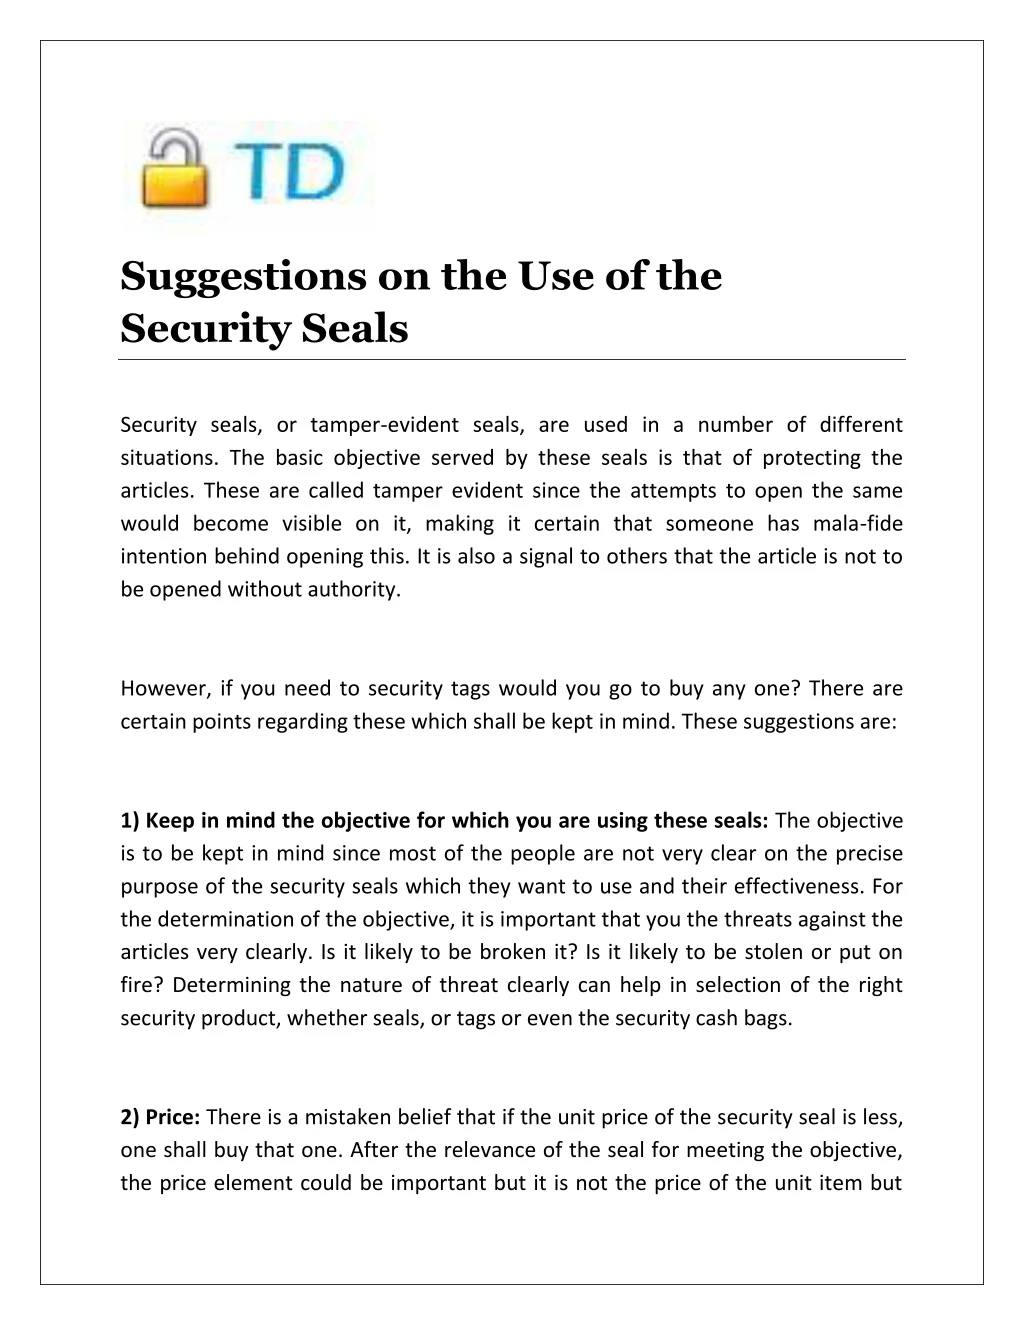 suggestions on the use of the security seals